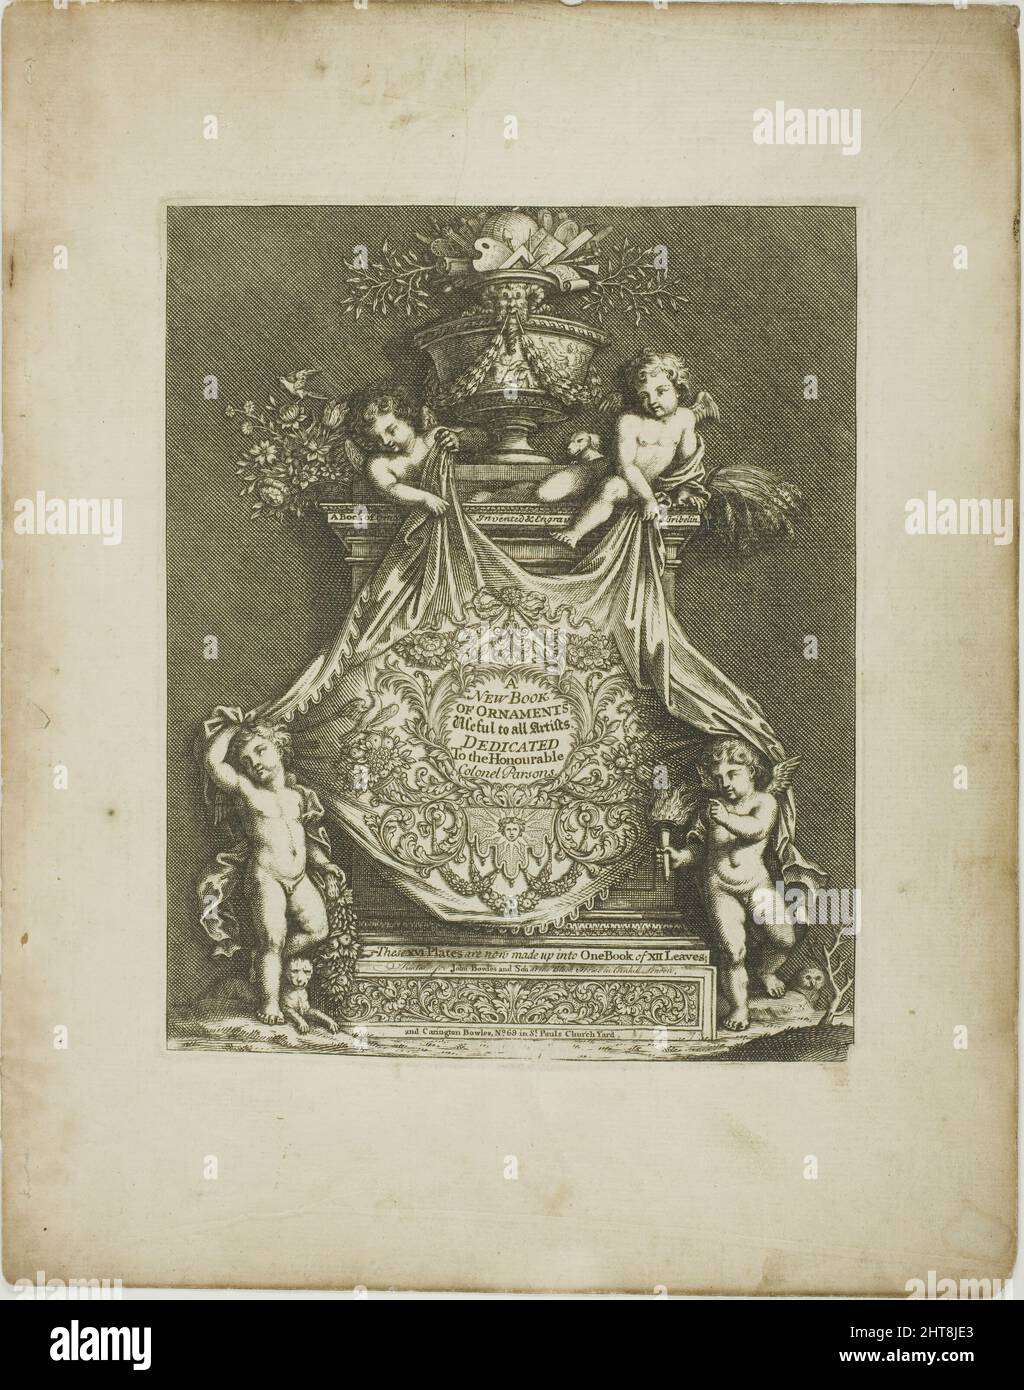 Plate One, from A New Book of Ornaments, 1704. Stock Photo